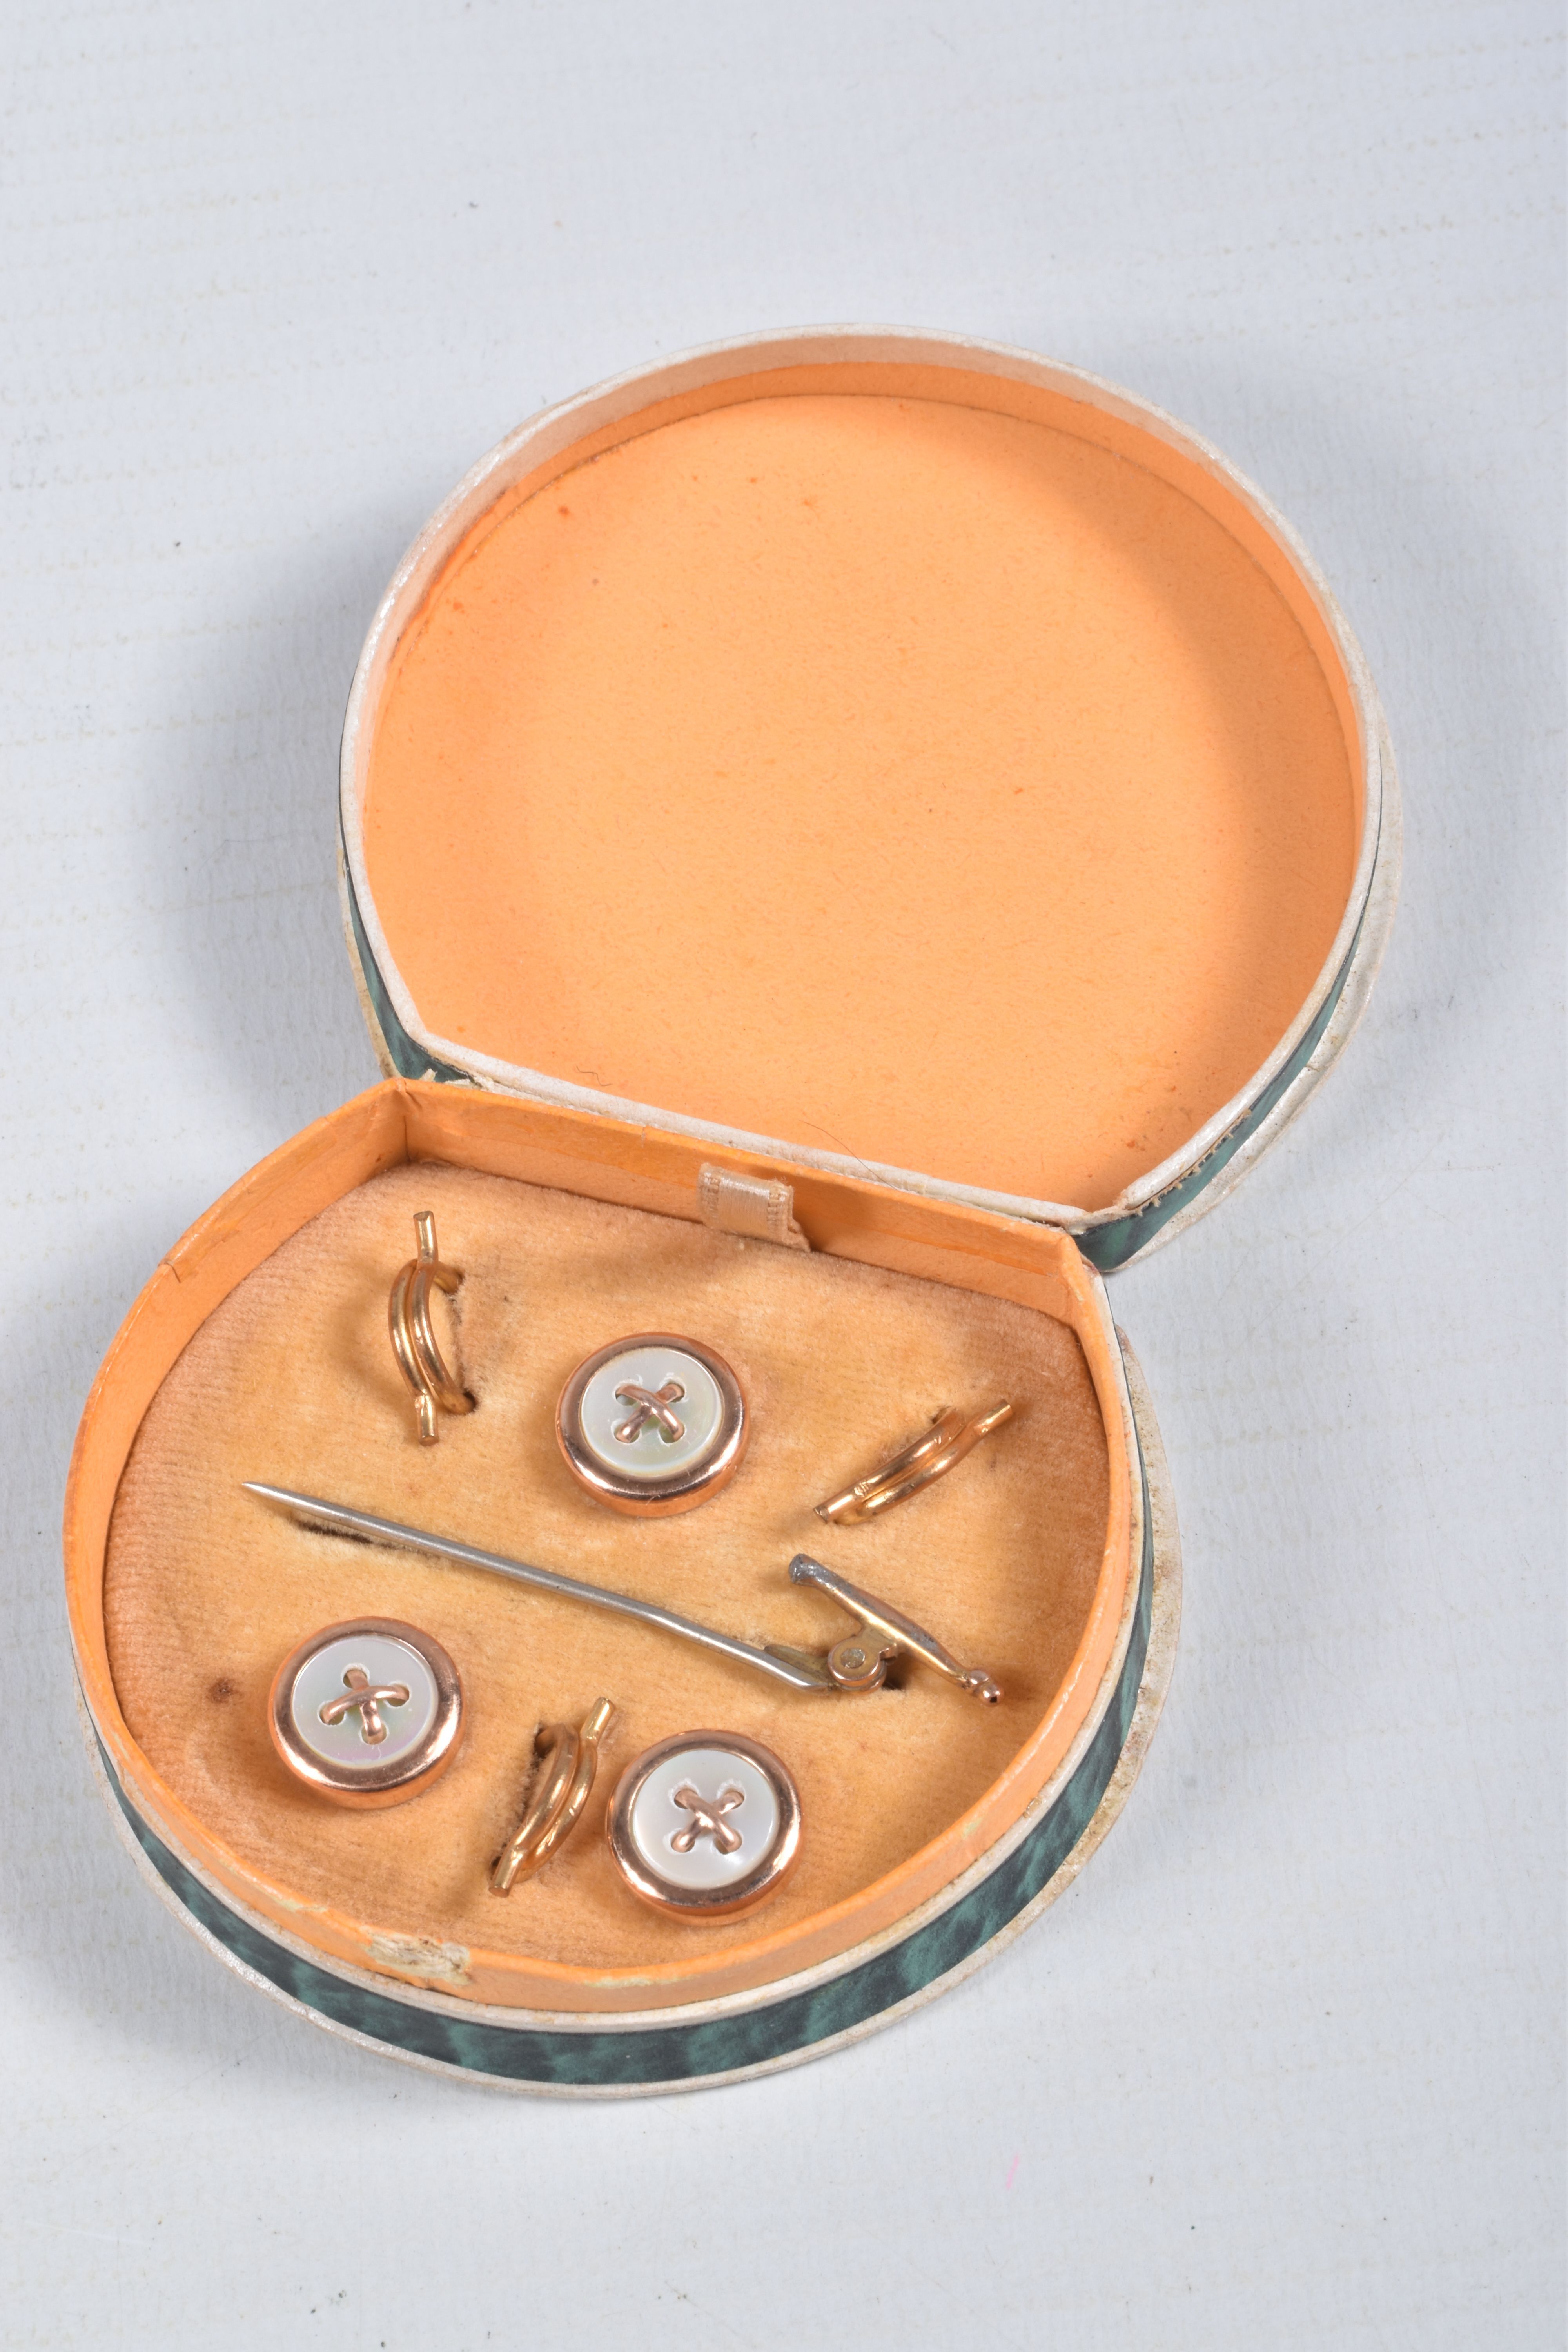 A COMPACT AND COSTUME JEWELLERY, circular powder compact, a box with three mother of pearl dress - Image 15 of 17